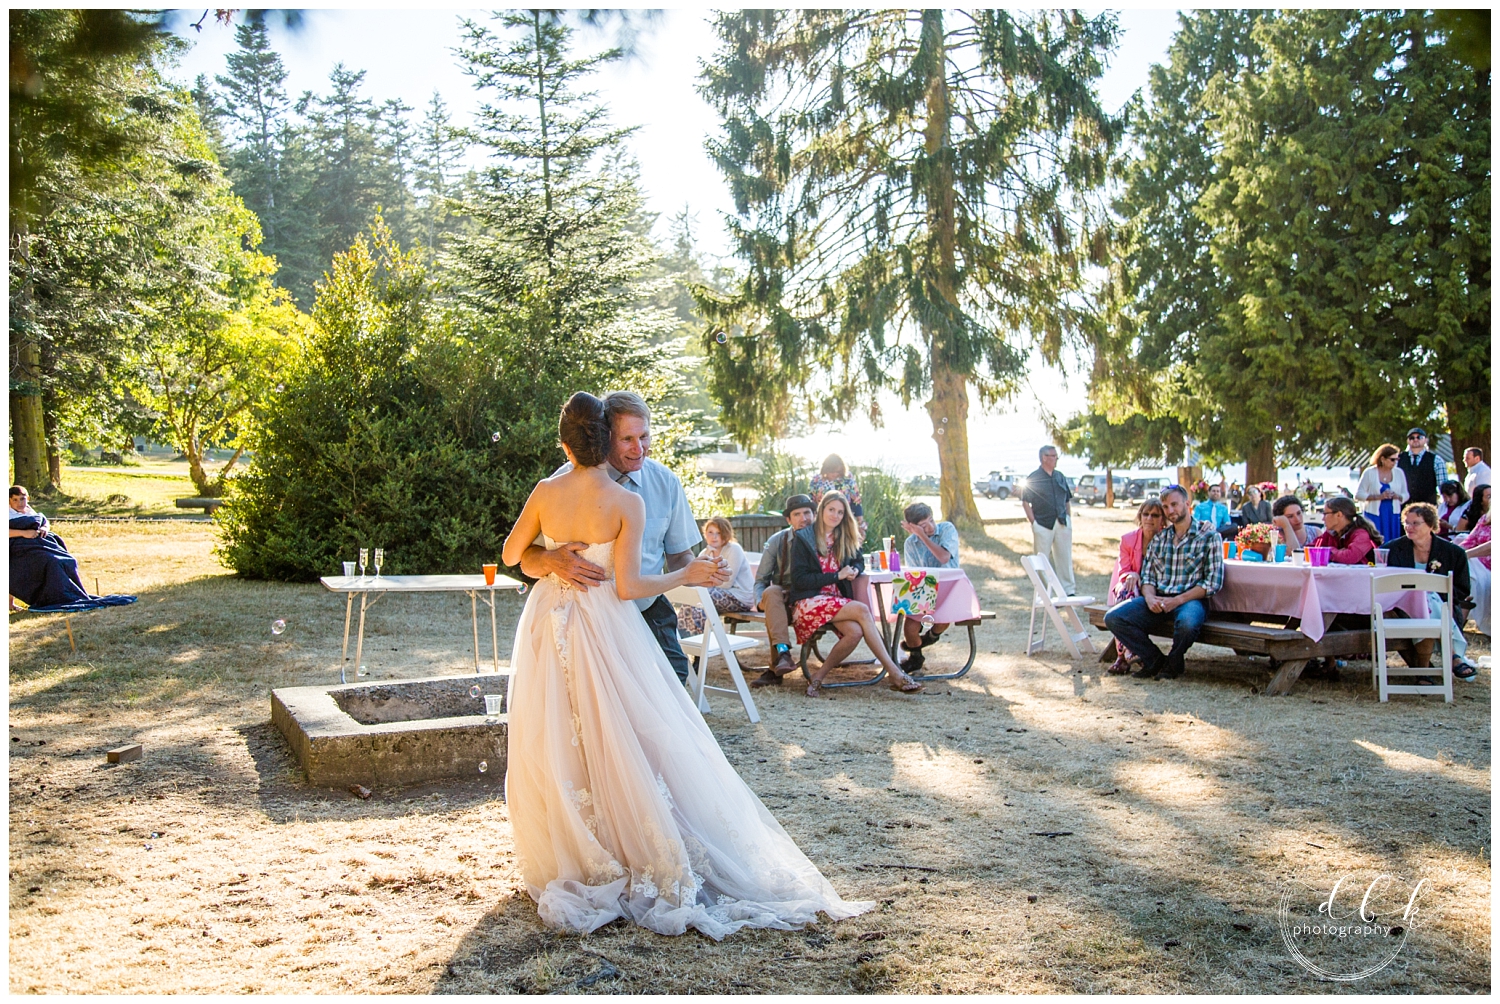 bride dances with her father during wedding reception at Washington Park, Anacortes